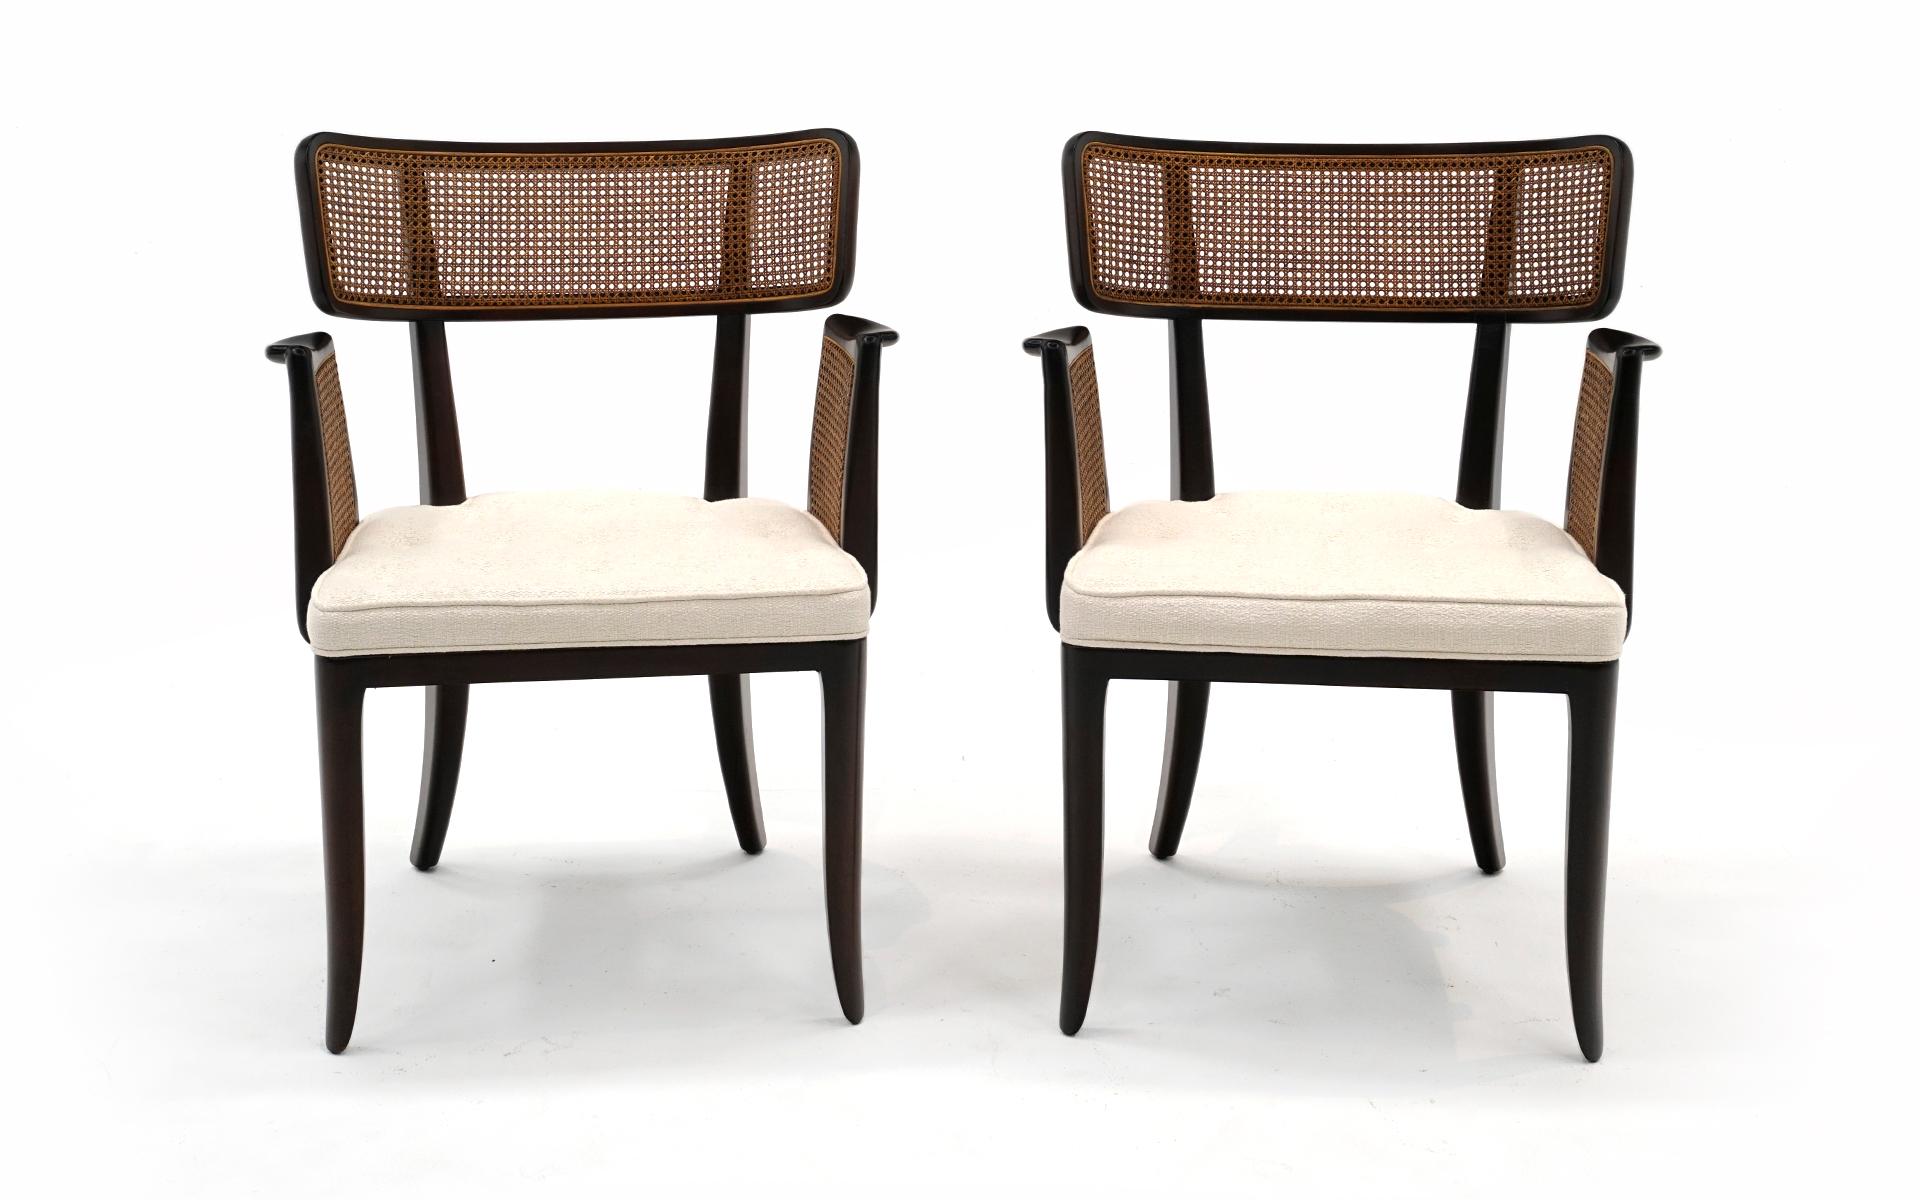 Two sculptural dining chairs / occasional chairs with arms designed by Edward Wormley for Dunbar. These have been expertly refinished and reupholstered in an off white boucle fabric. No holes or damage to the cane. The frames may show a few signs of